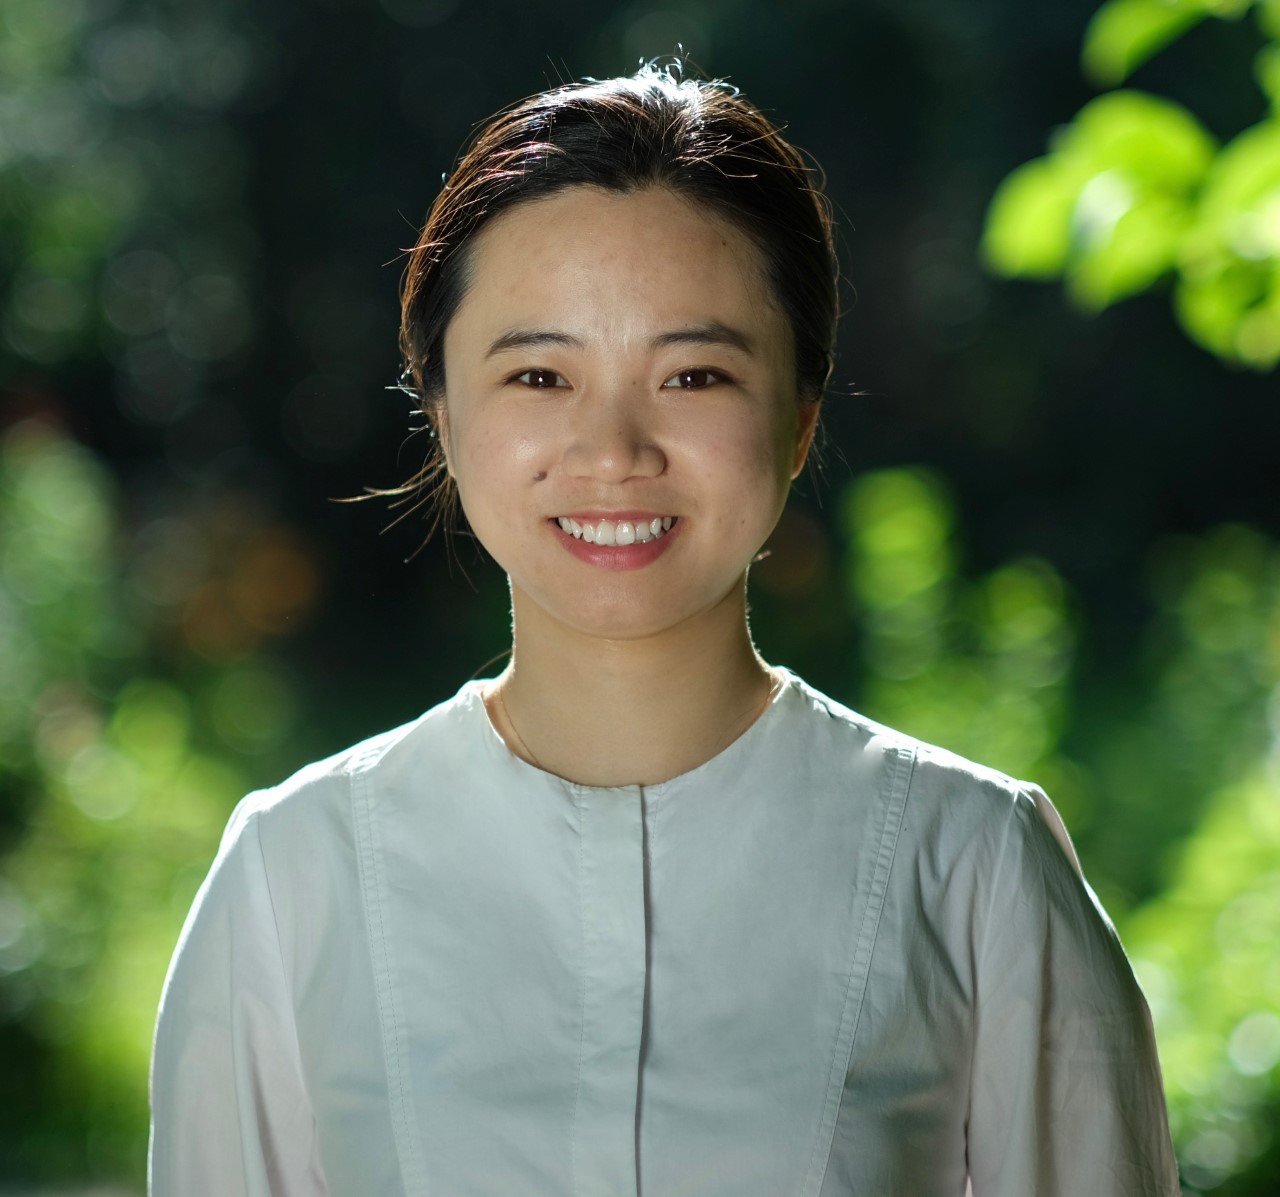 A photo of Jingying Hu. A woman with black hair, black eyes, and a white top smiling against a sunlit leaves in soft focus. 